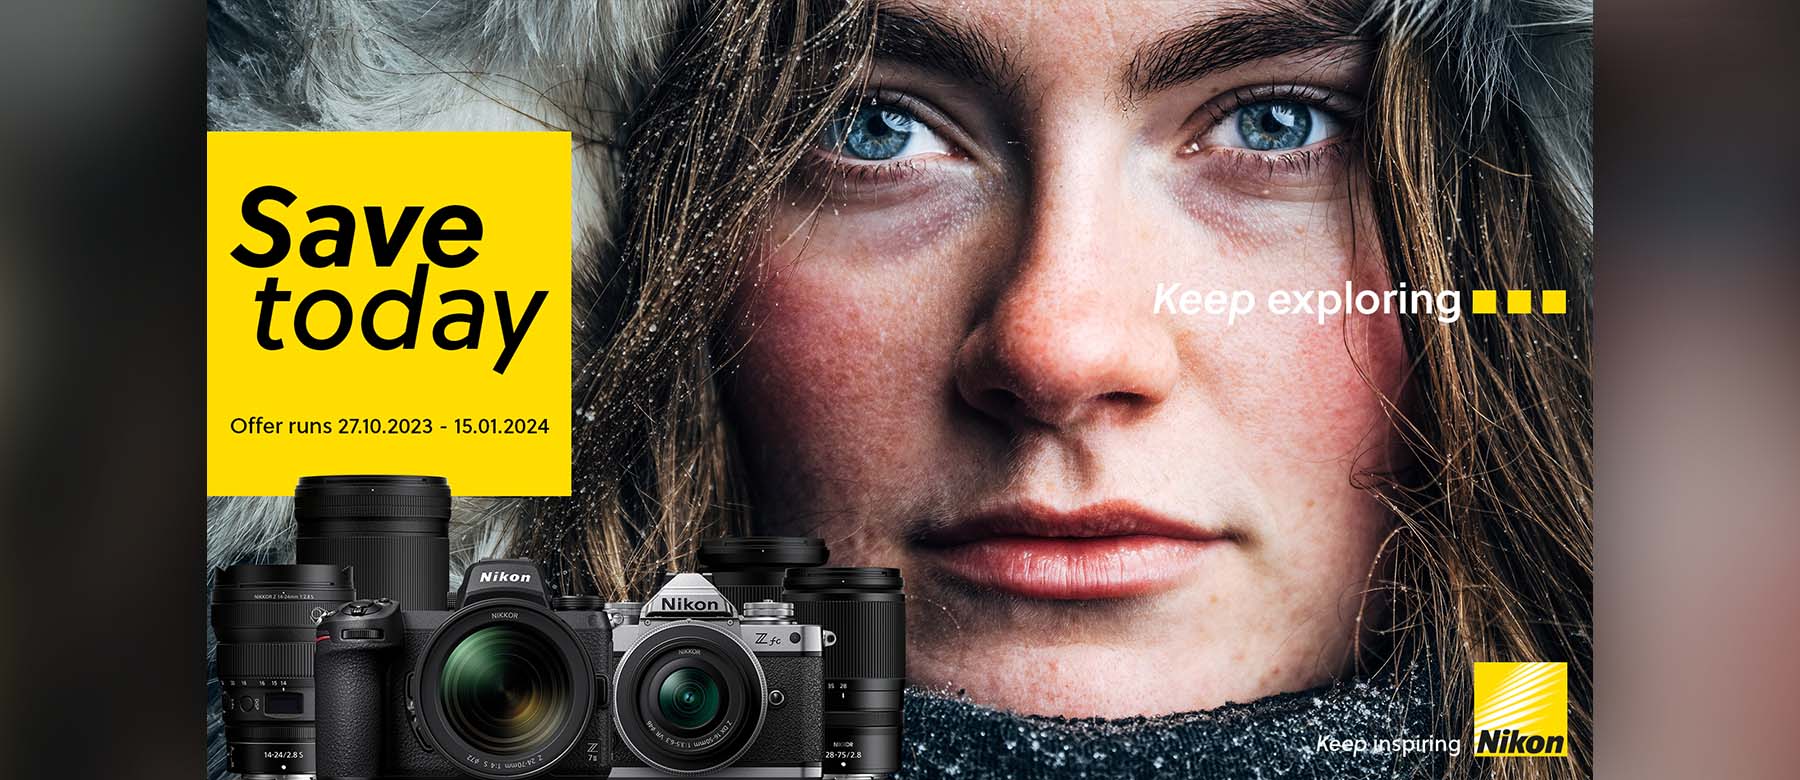 Explore huge savings this winter with Nikon - Promotional home page banner linking to the collection page